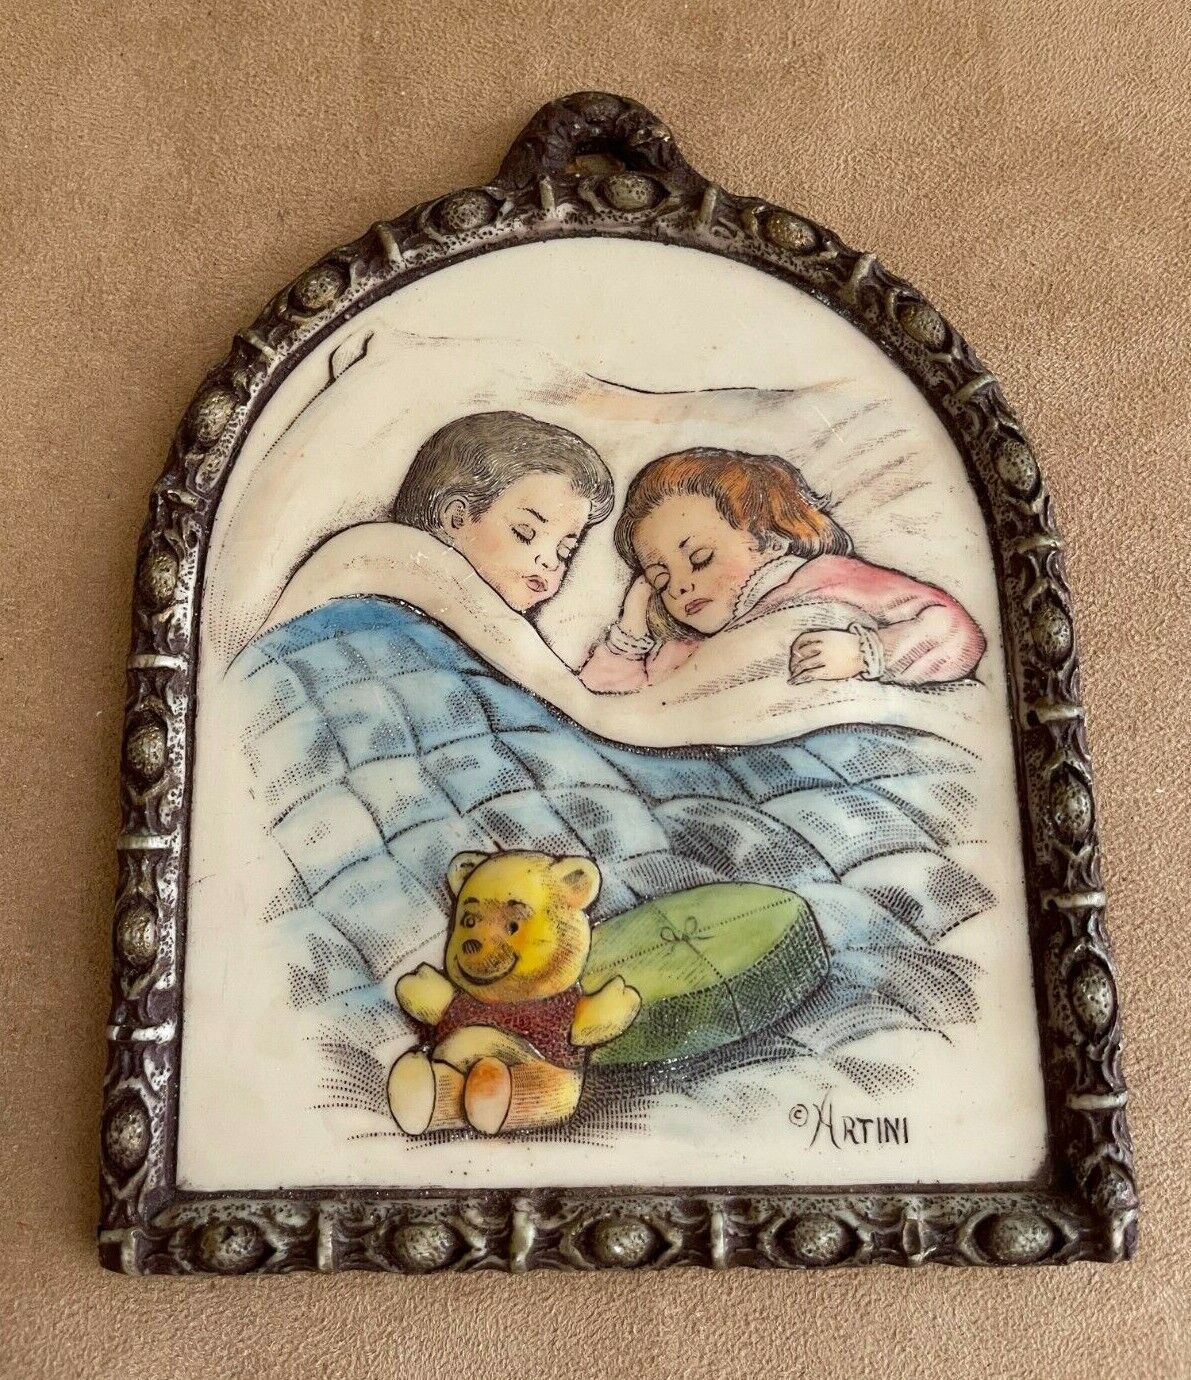 Winnie the Pooh ARTINI Hand Painted girls bed Twin Etched Sculptured Engraving